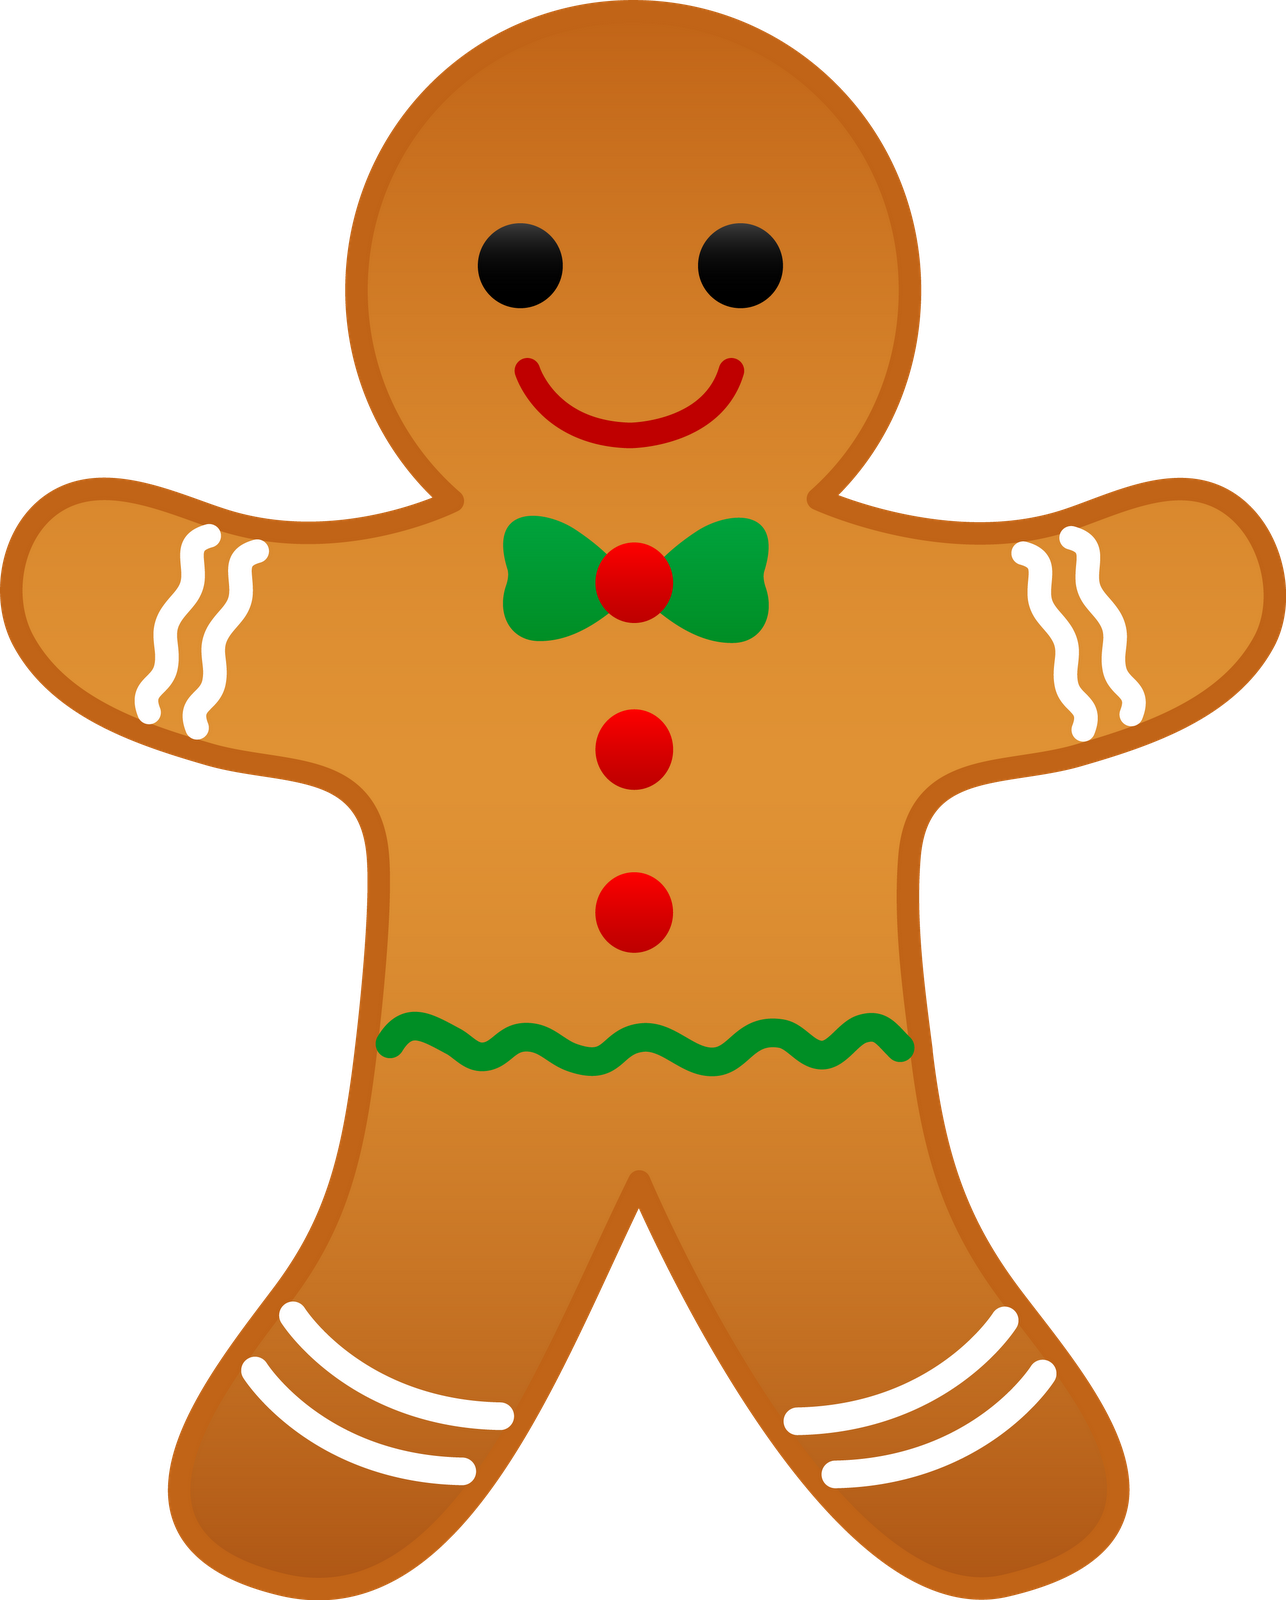 Decoration On Yellow Christmas Gingerbread Man Smiling Clip Art Image